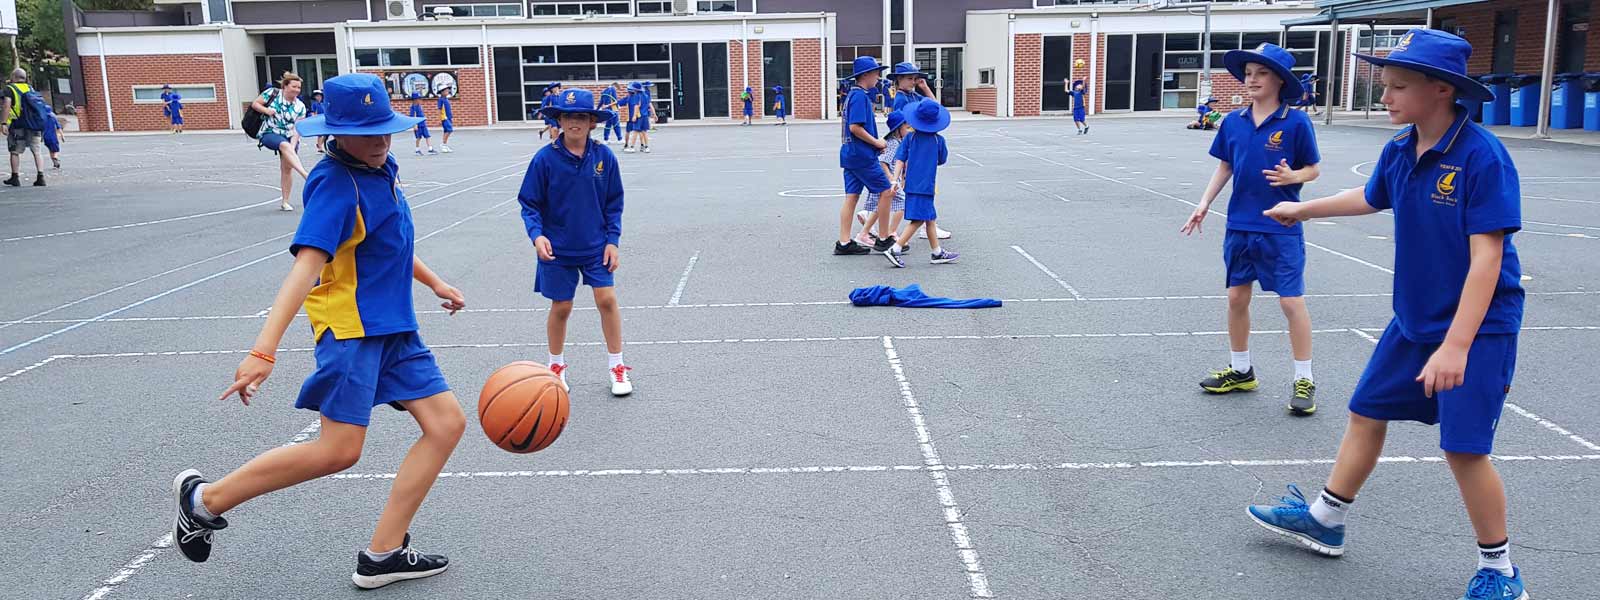 Black Rock Primary School - Physical Education